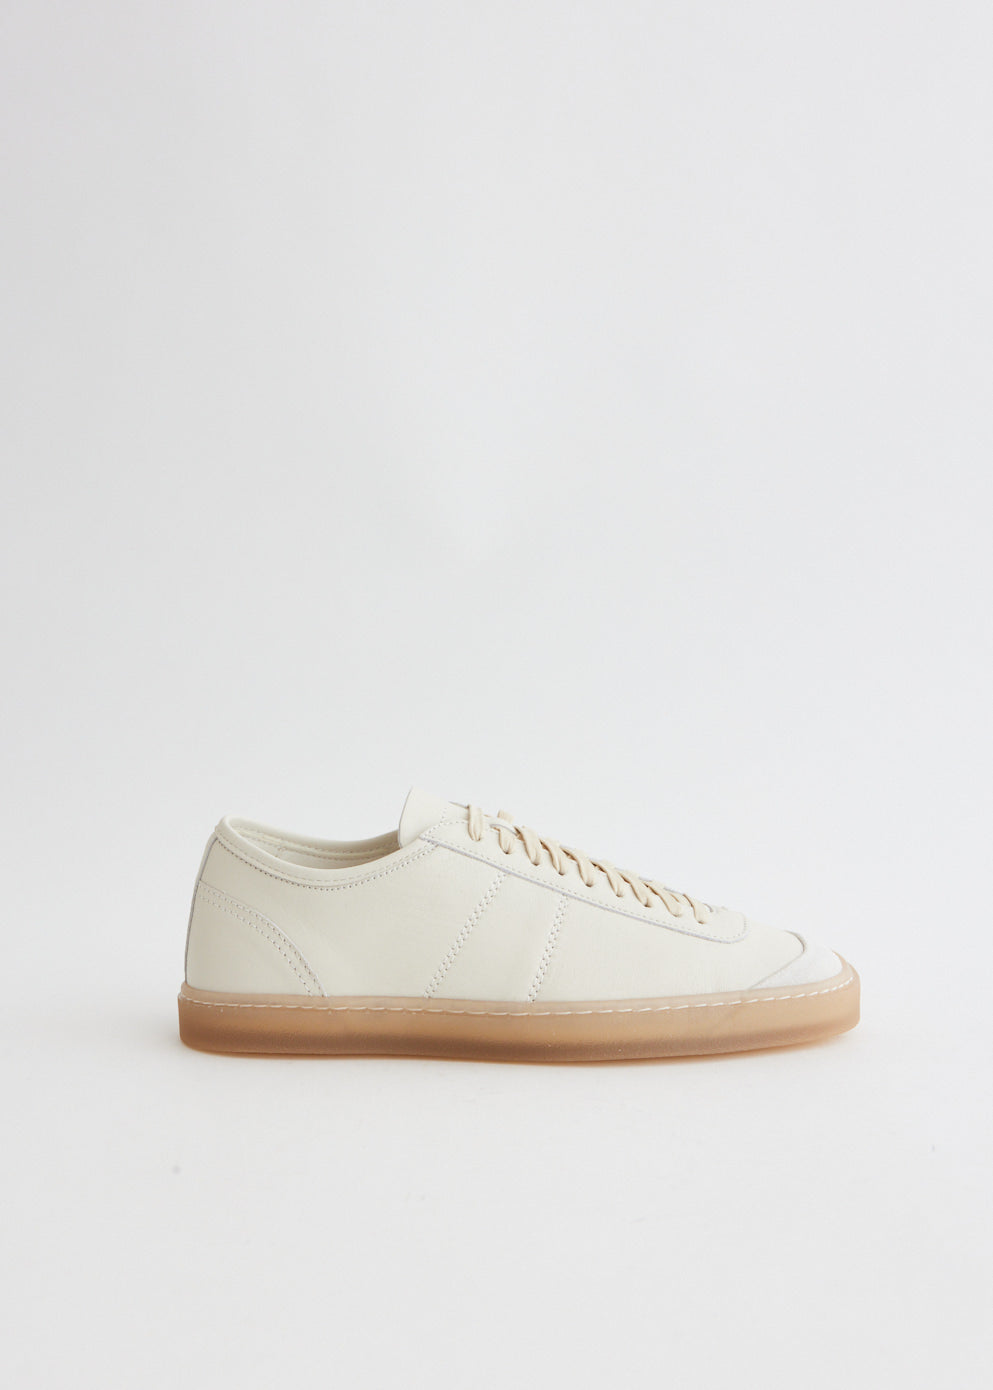 Linoleum Basic Laced Up Trainers